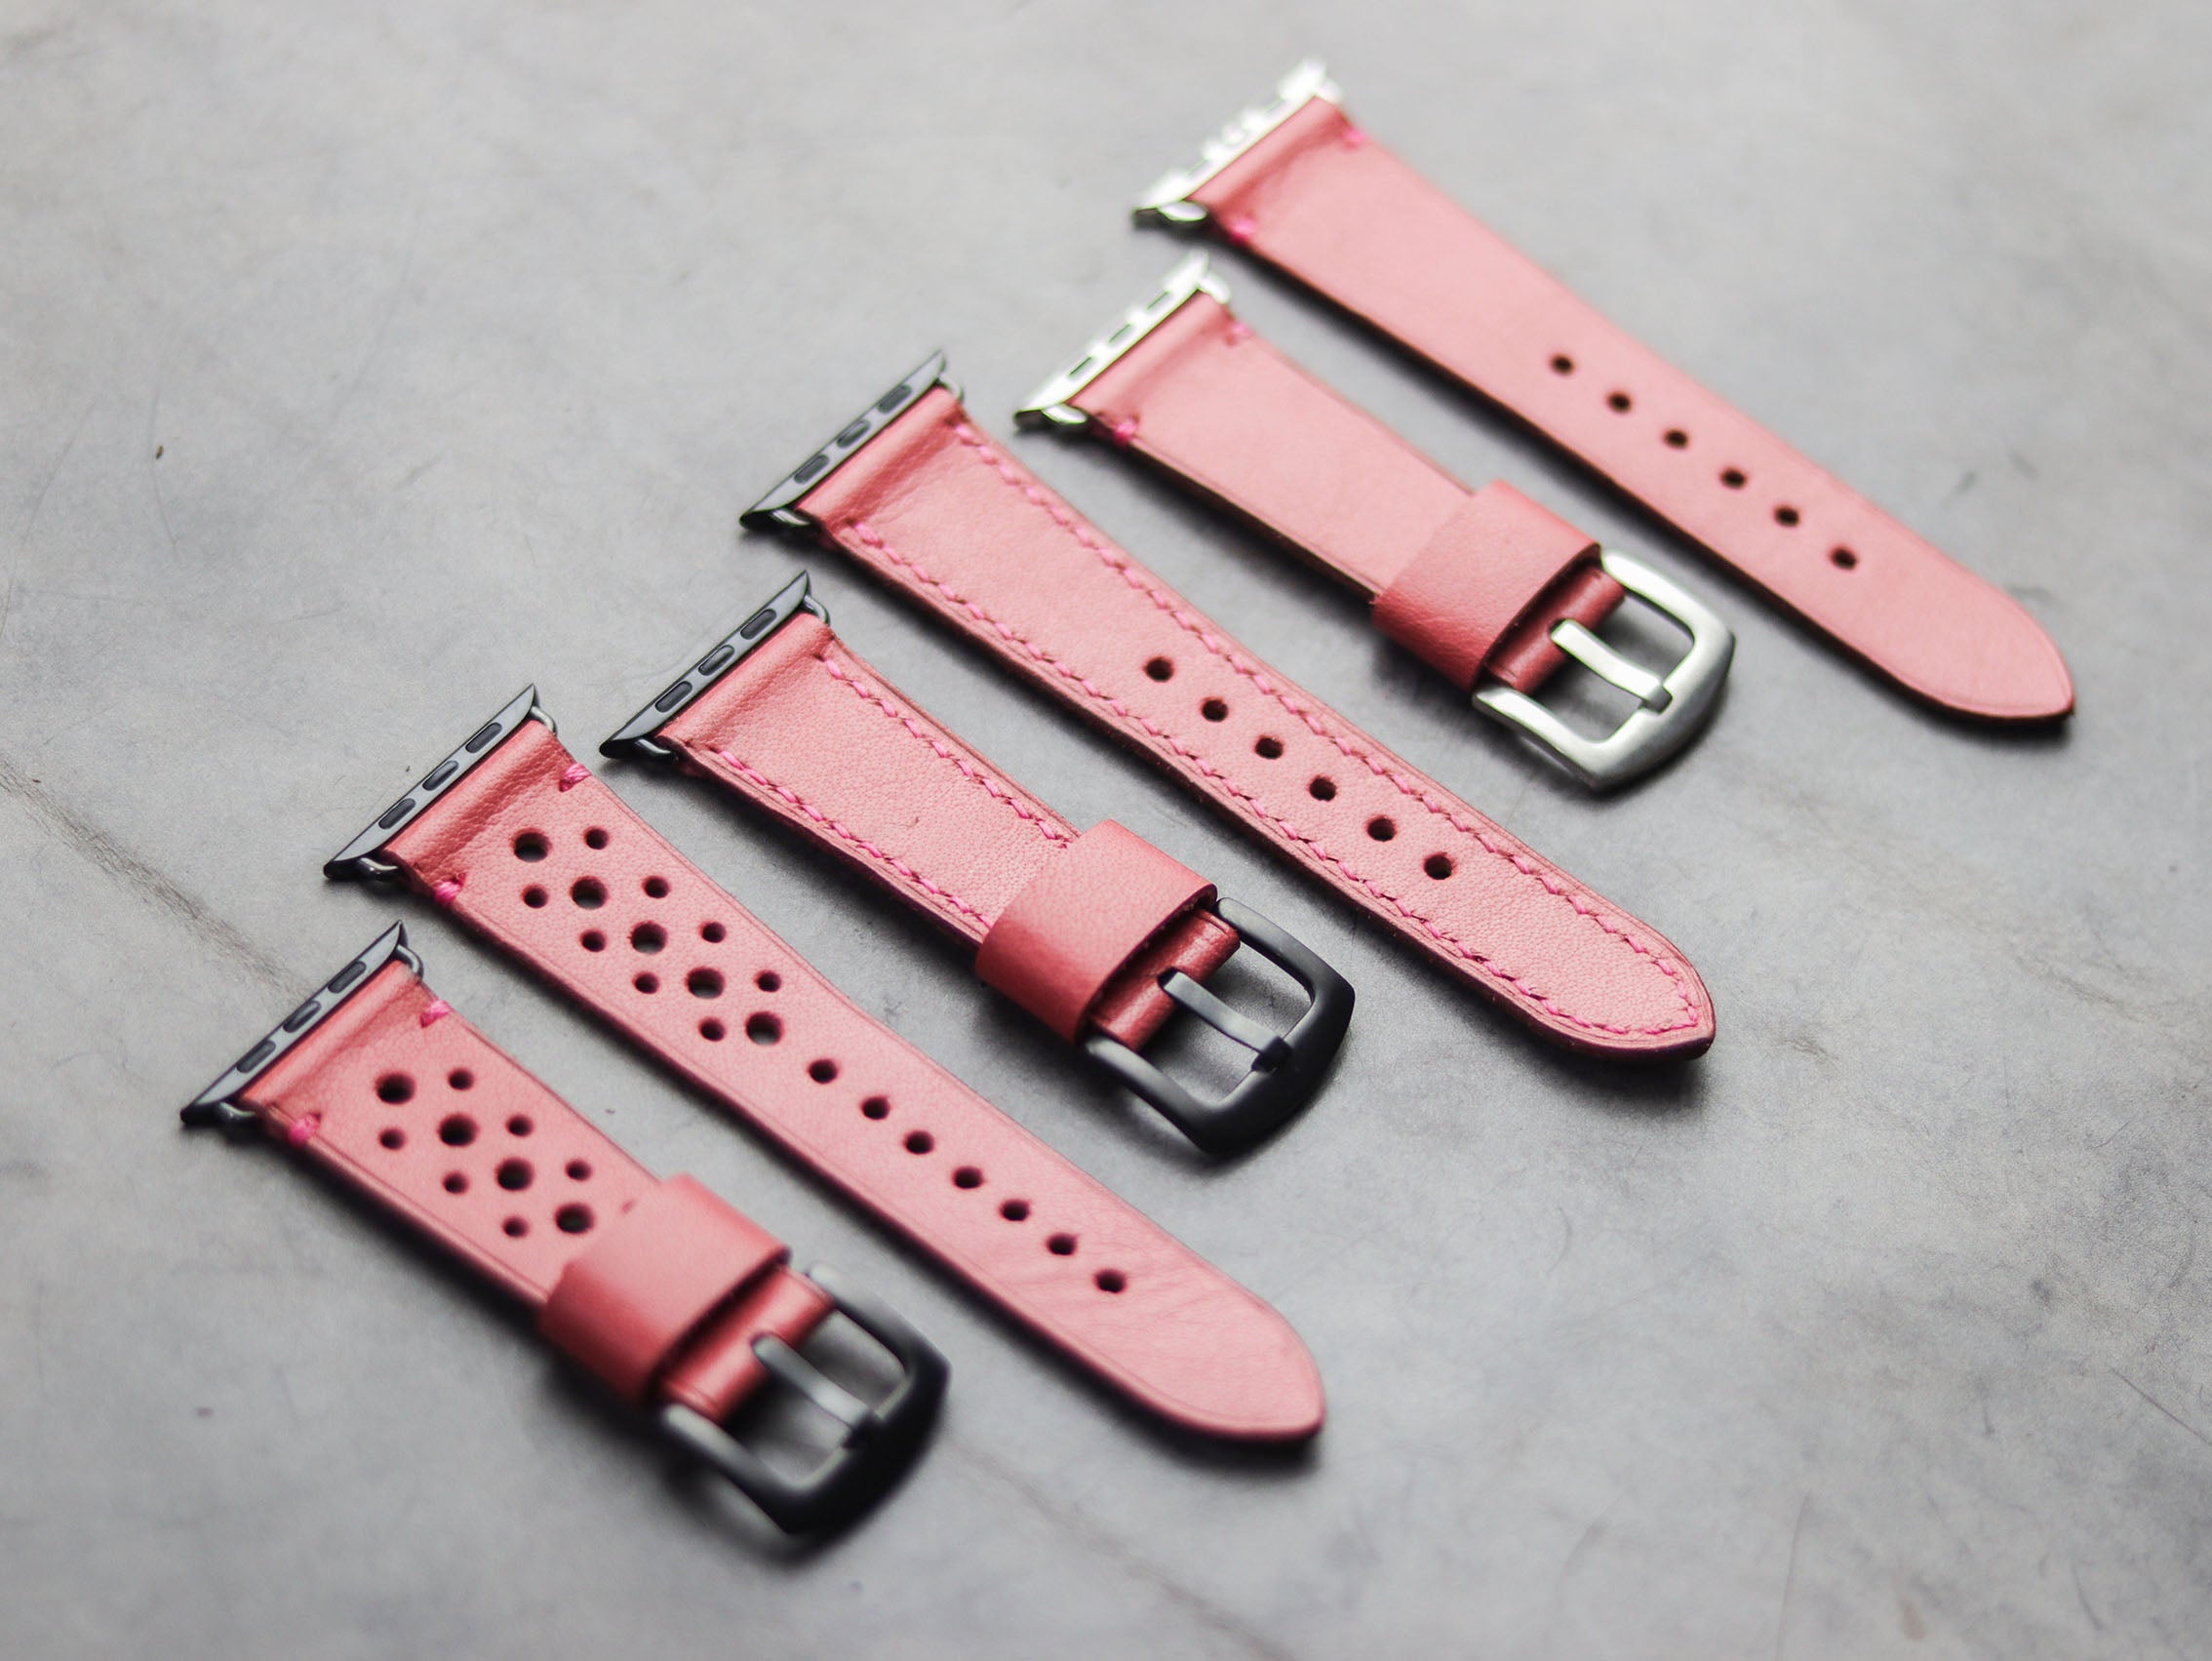 FLAMINGO PINK RALLY HAND-CRAFTED APPLE WATCH STRAPS